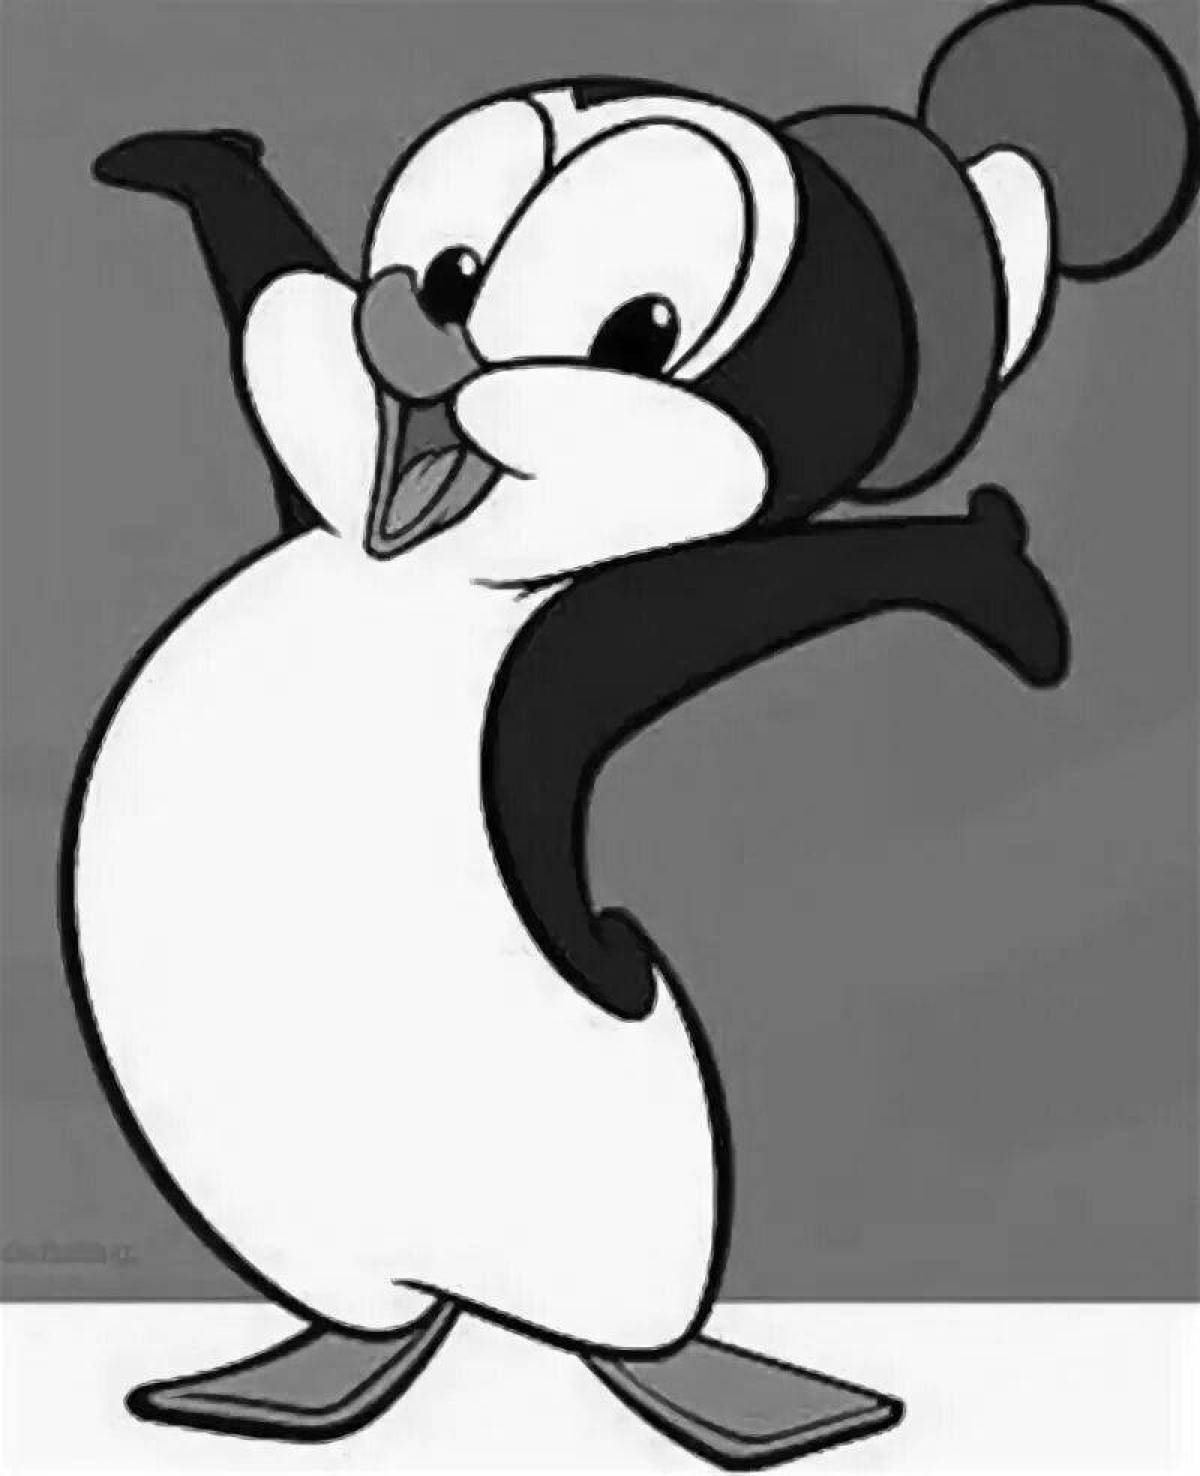 Playful chilly willy